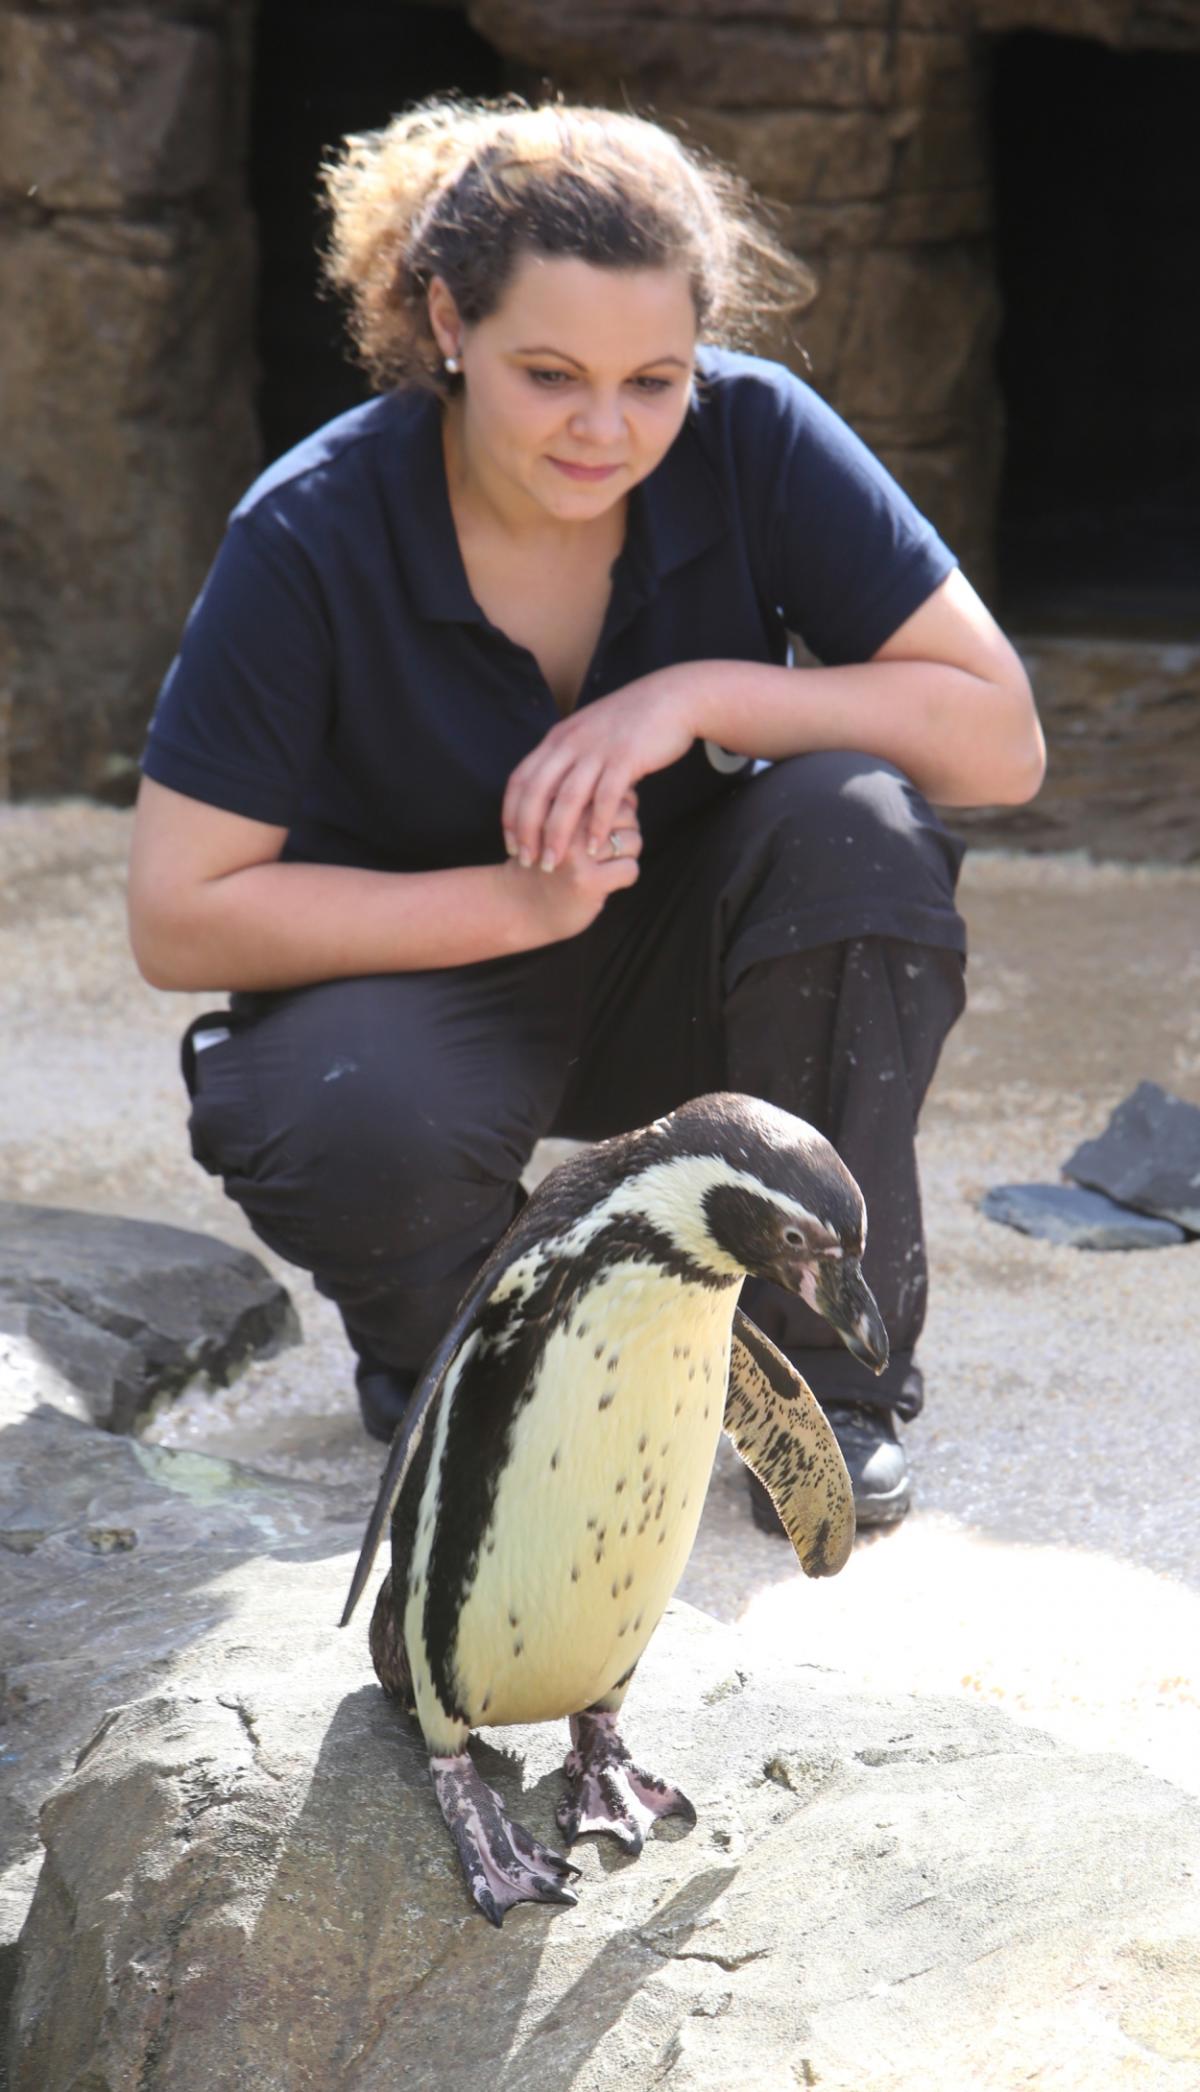 Penguins arrive at Bournemouth Oceanarium. Pictures by Richard Crease